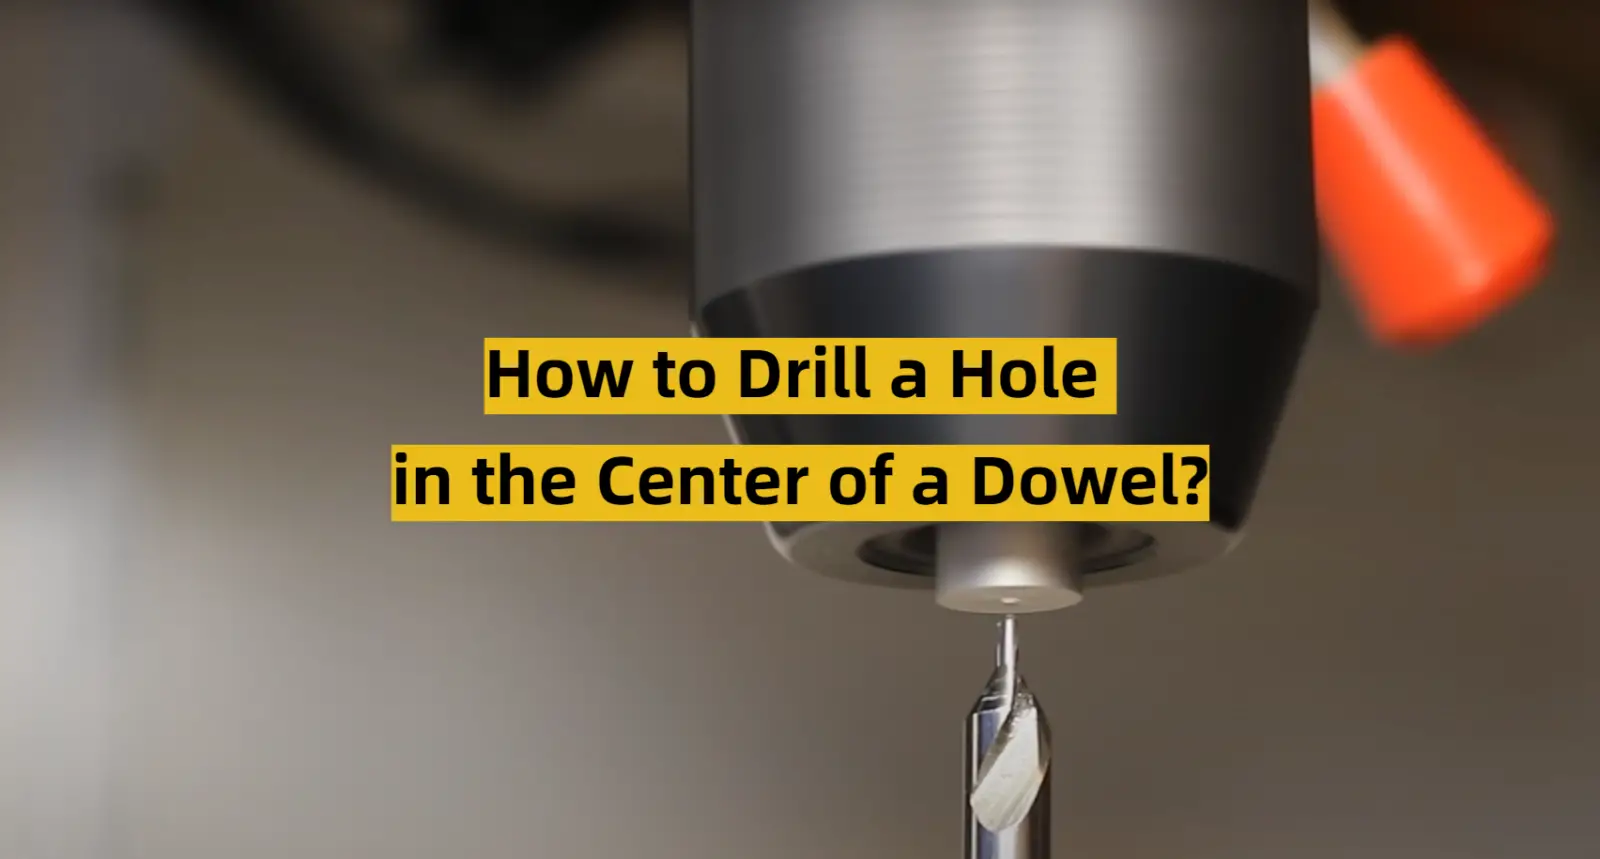 How to Drill a Hole in the Center of a Dowel?